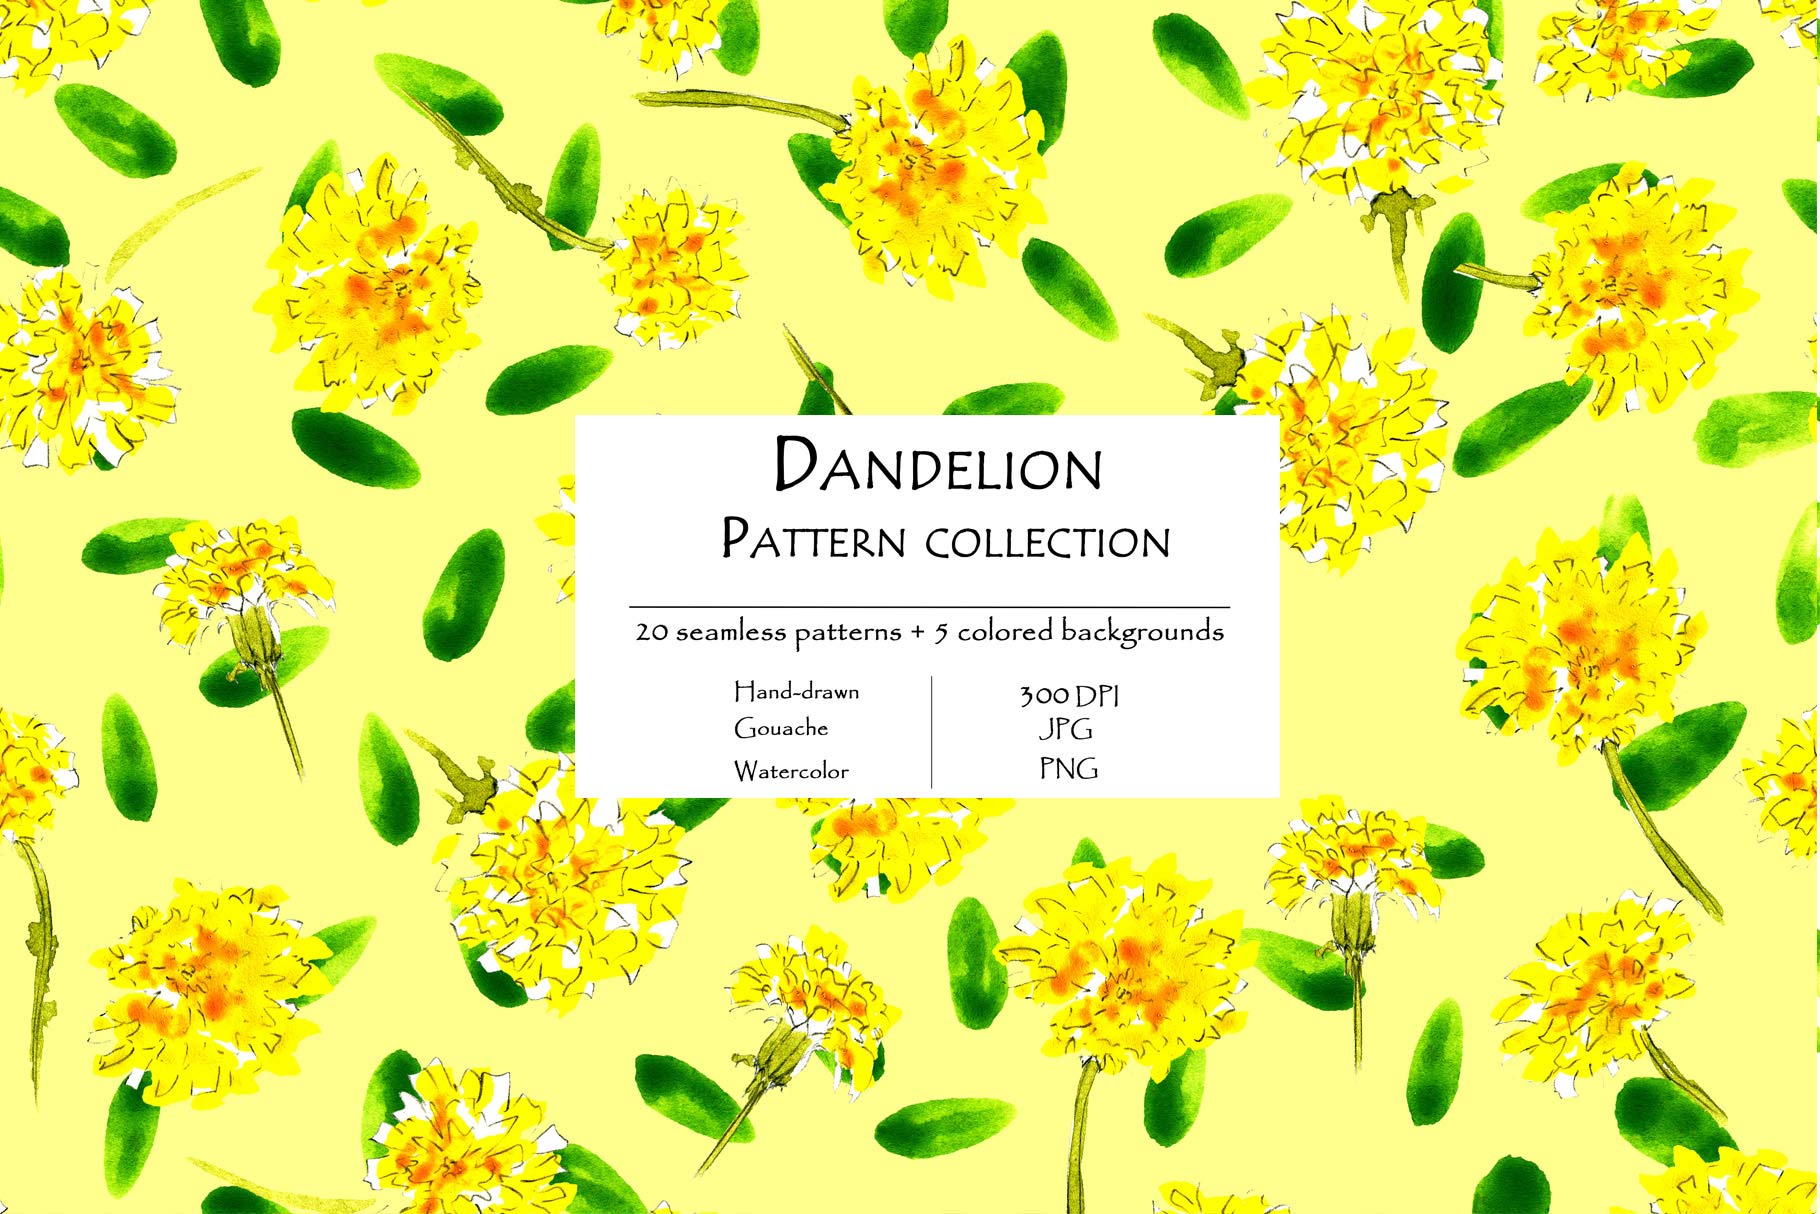 Dandelion Pattern Collection Of 20 Seamless Patterns And 5 Colored Background Yellow Background.